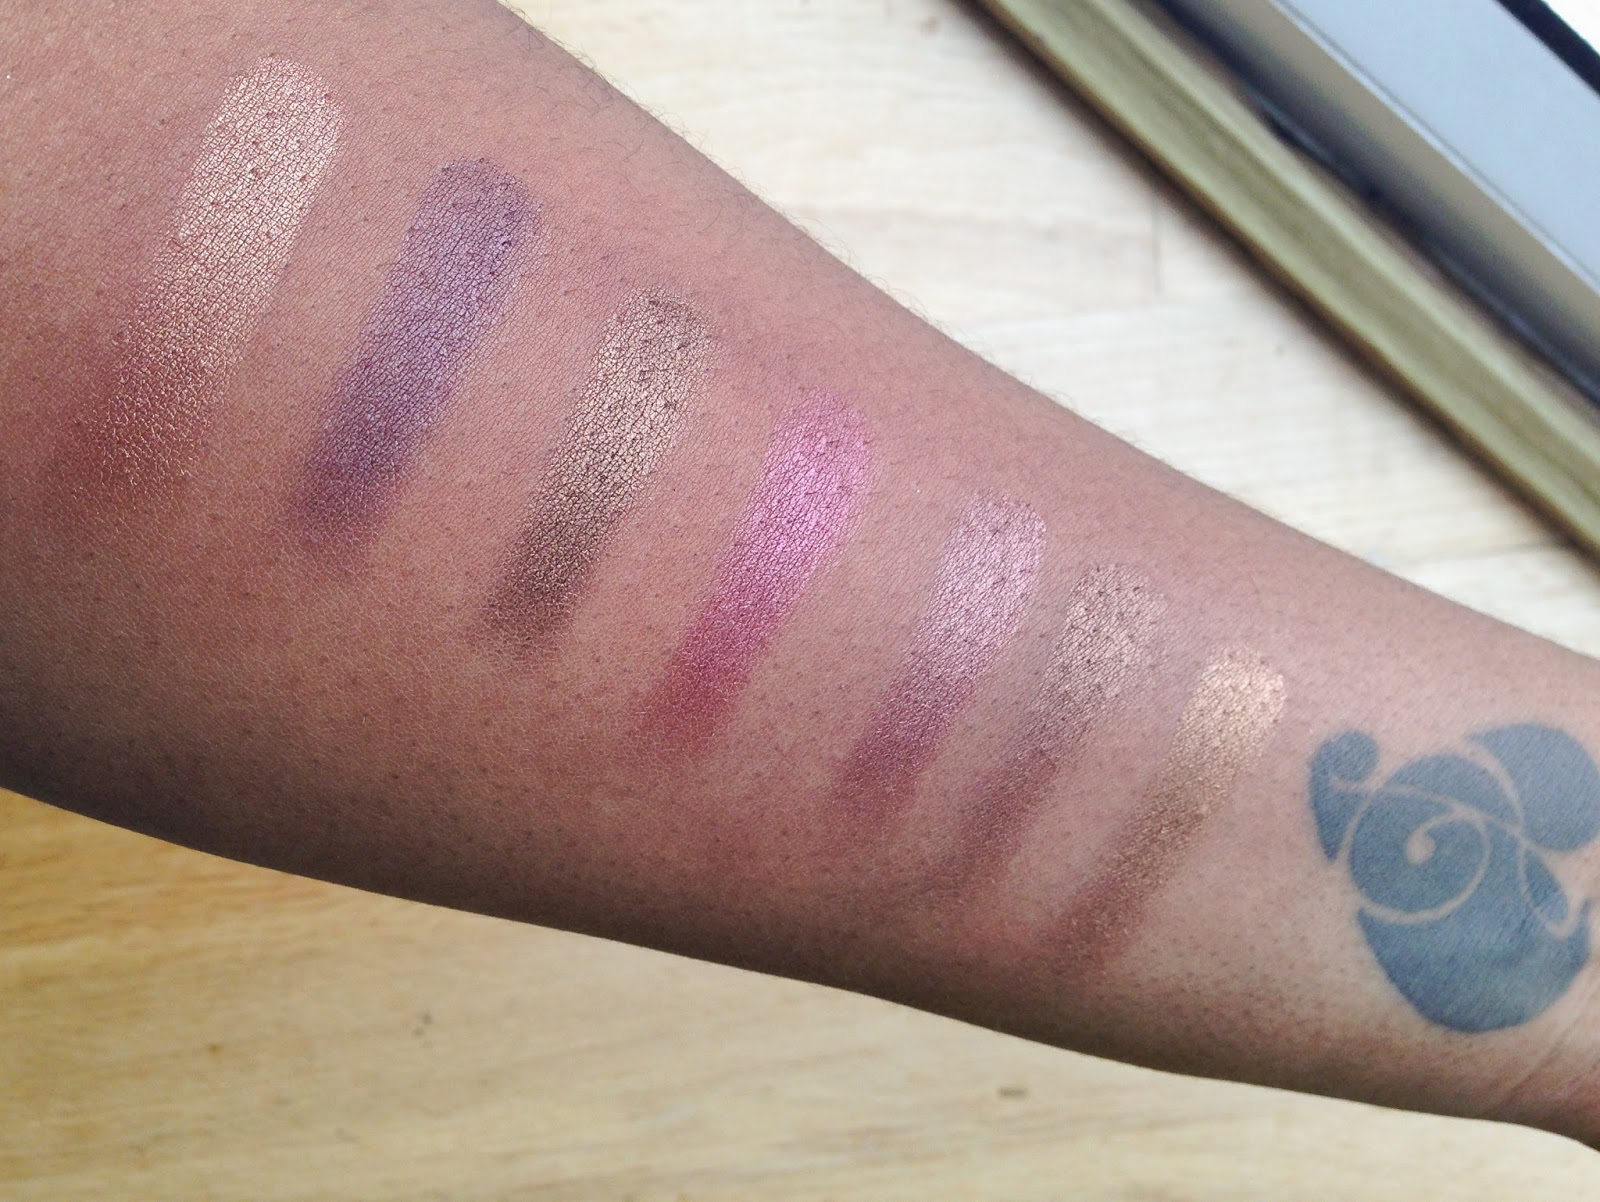 Coastal Scents Hot Pots Swatches Discoveries Of Self Blog